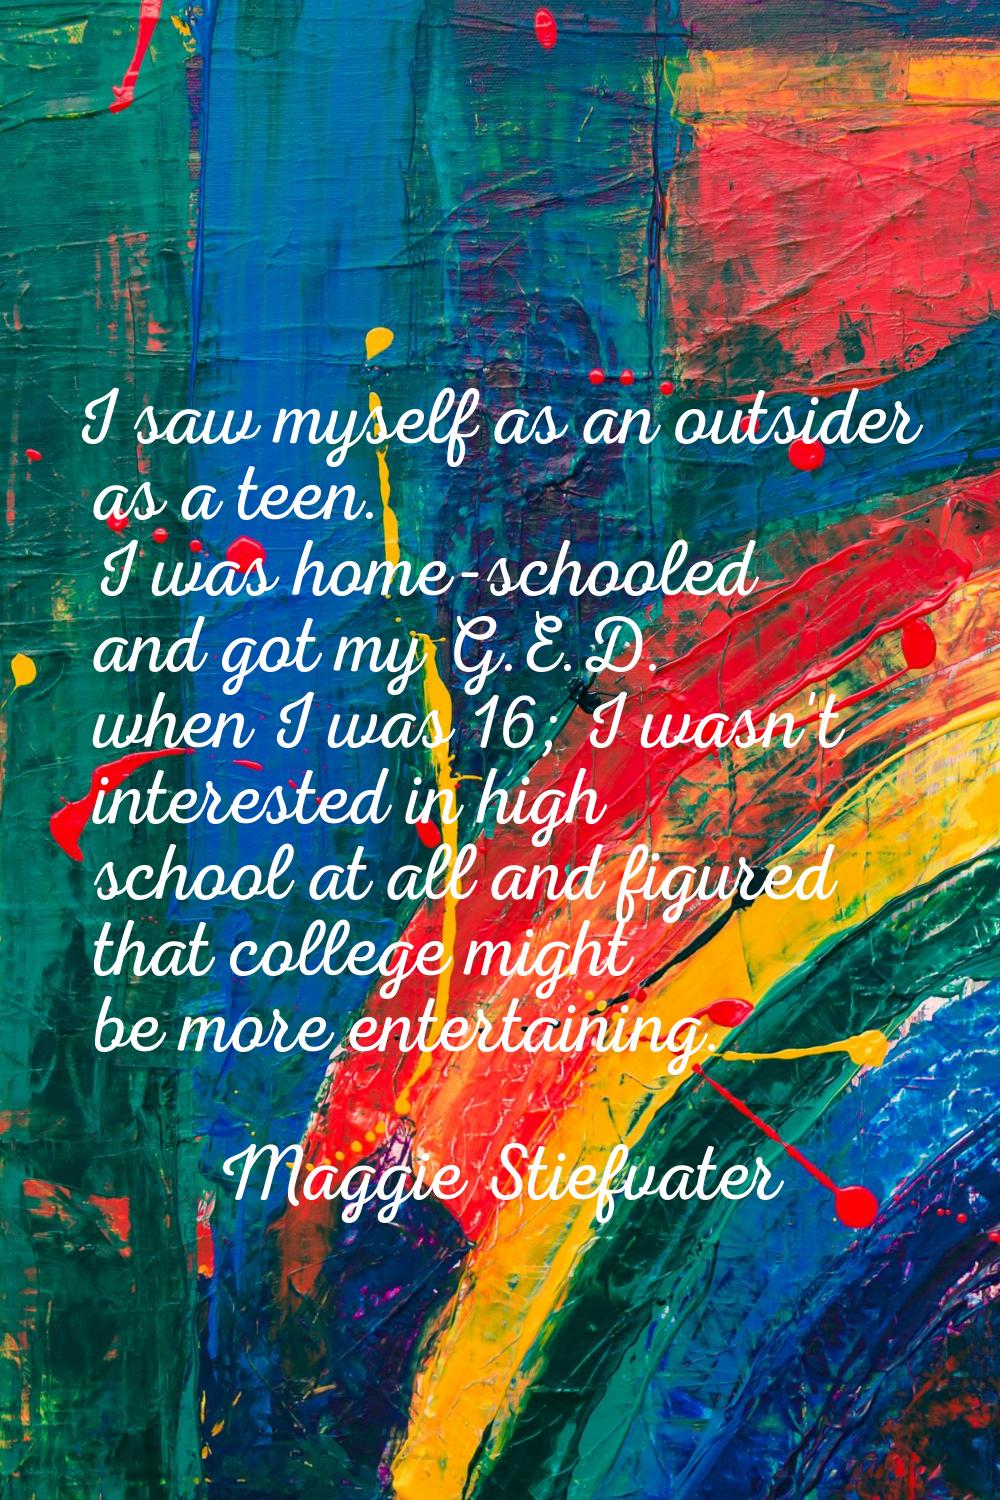 I saw myself as an outsider as a teen. I was home-schooled and got my G.E.D. when I was 16; I wasn'